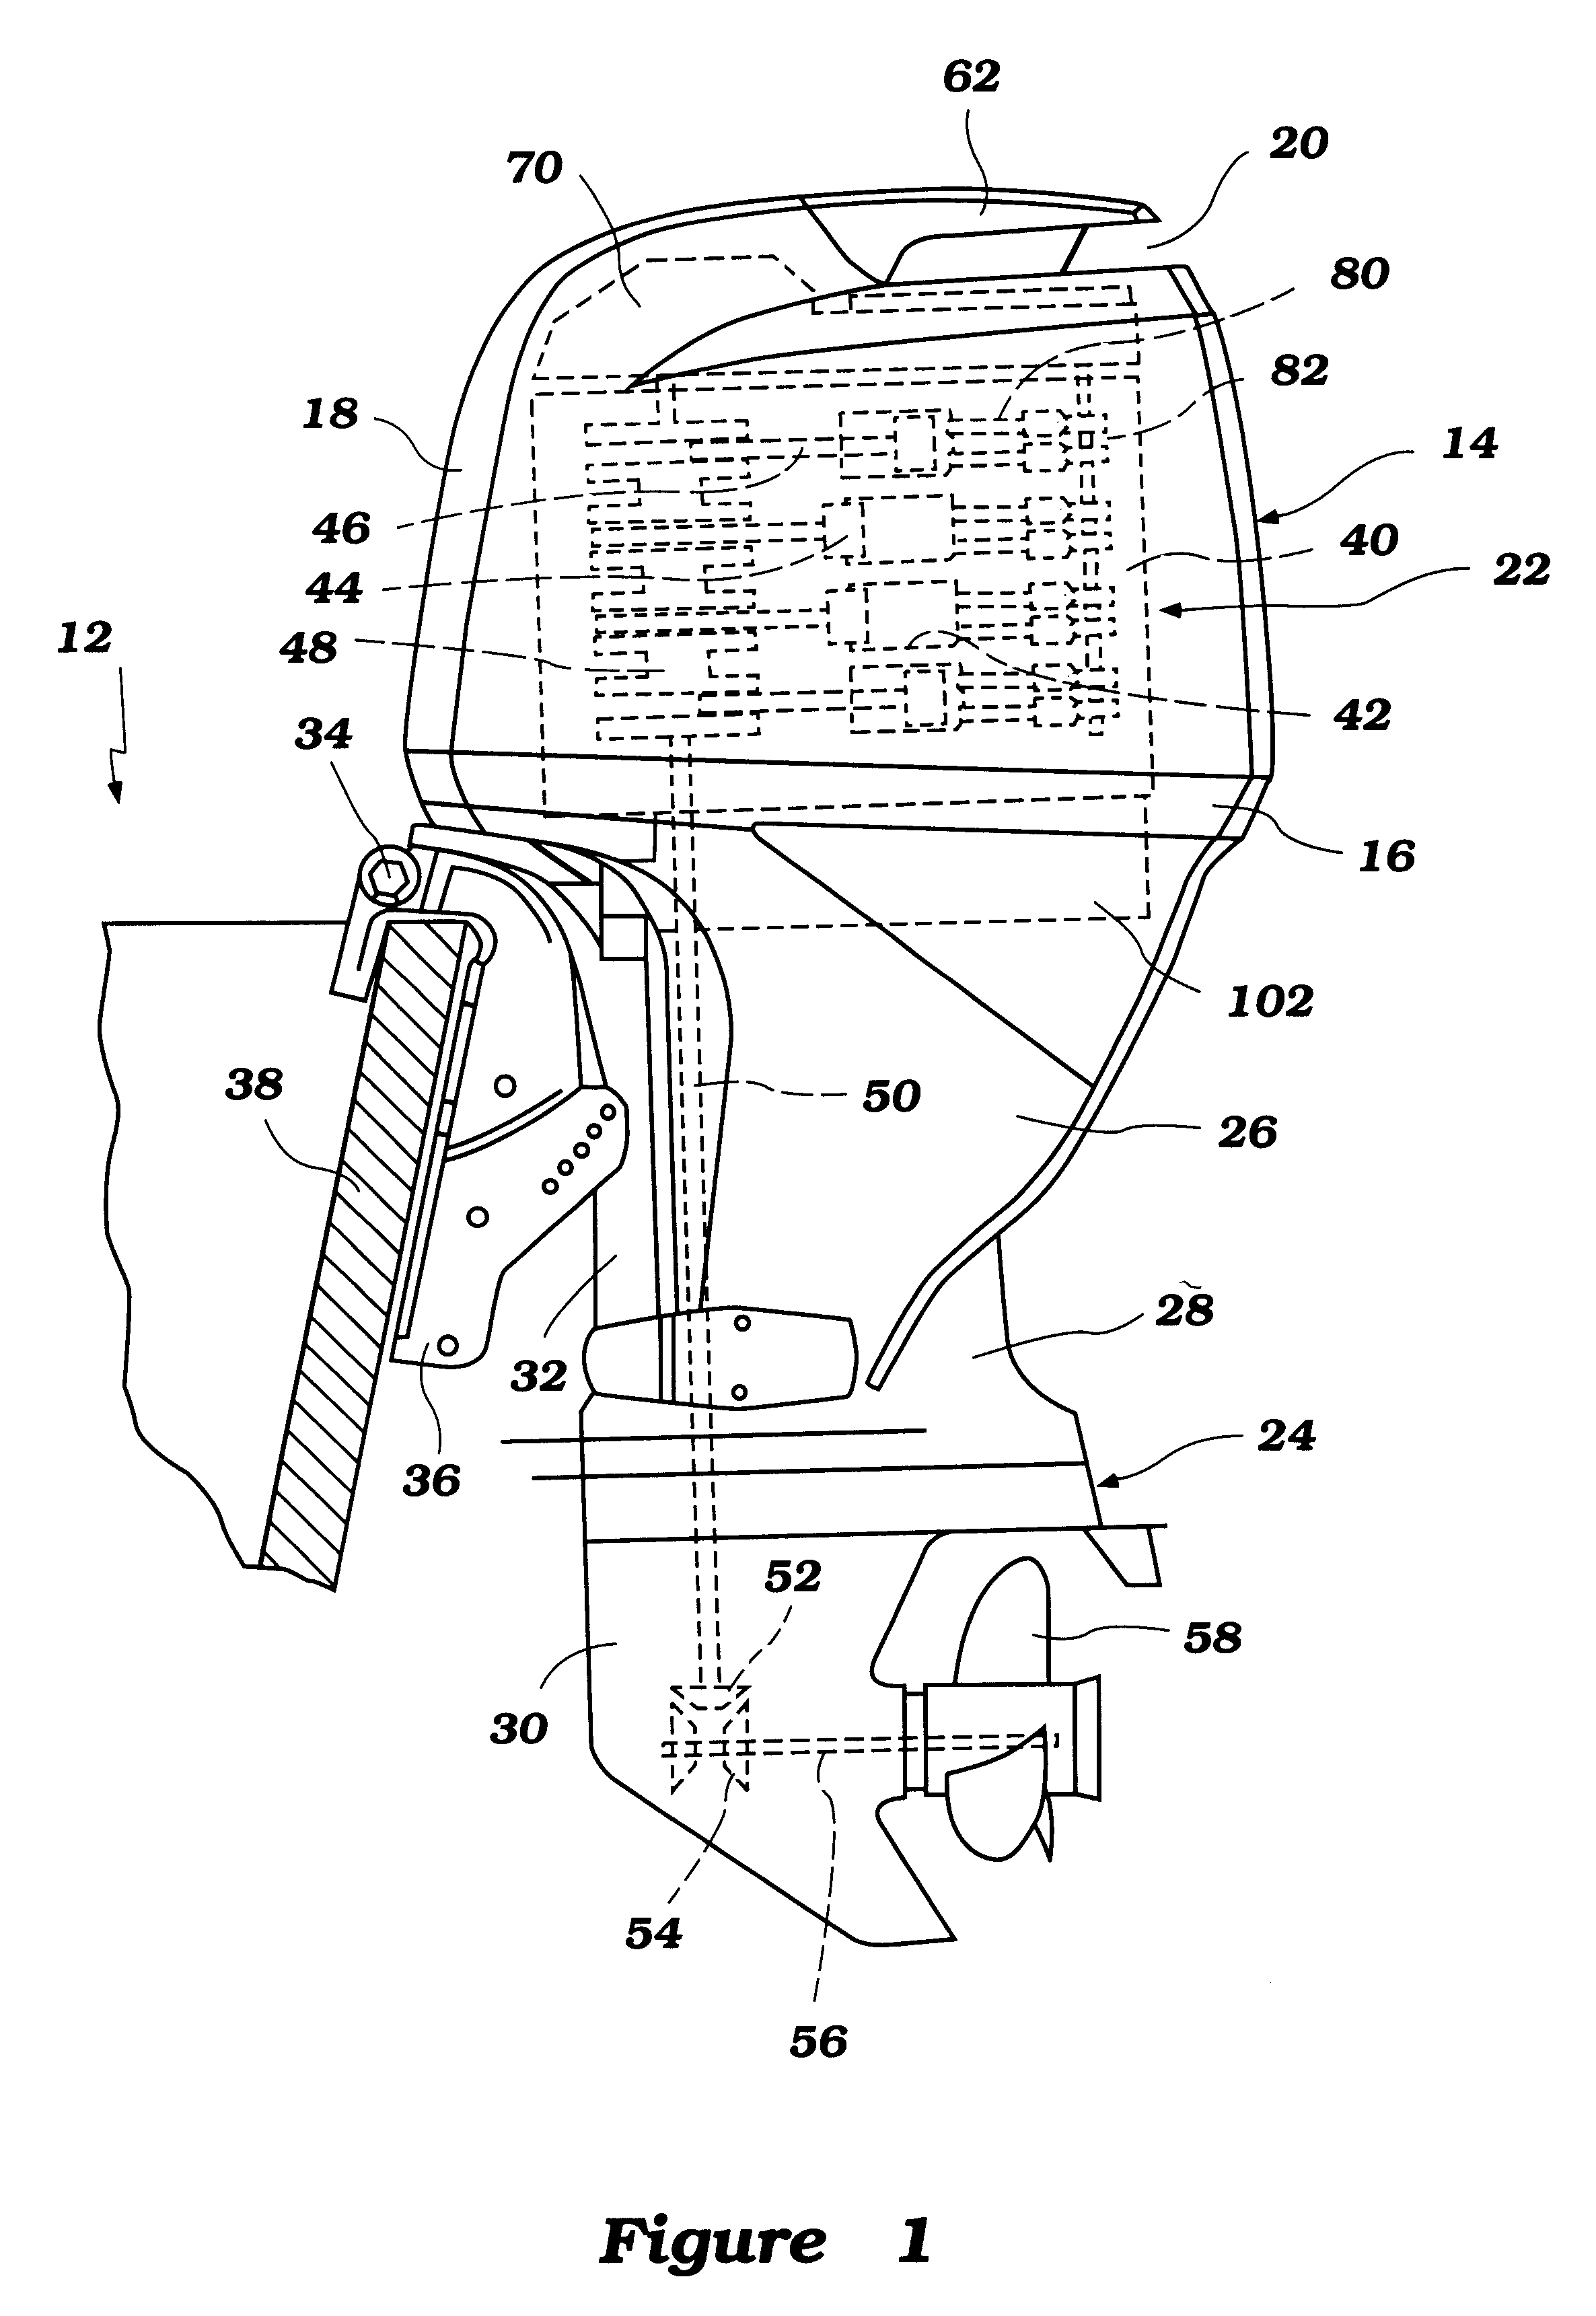 Cowling arrangement for outboard motor